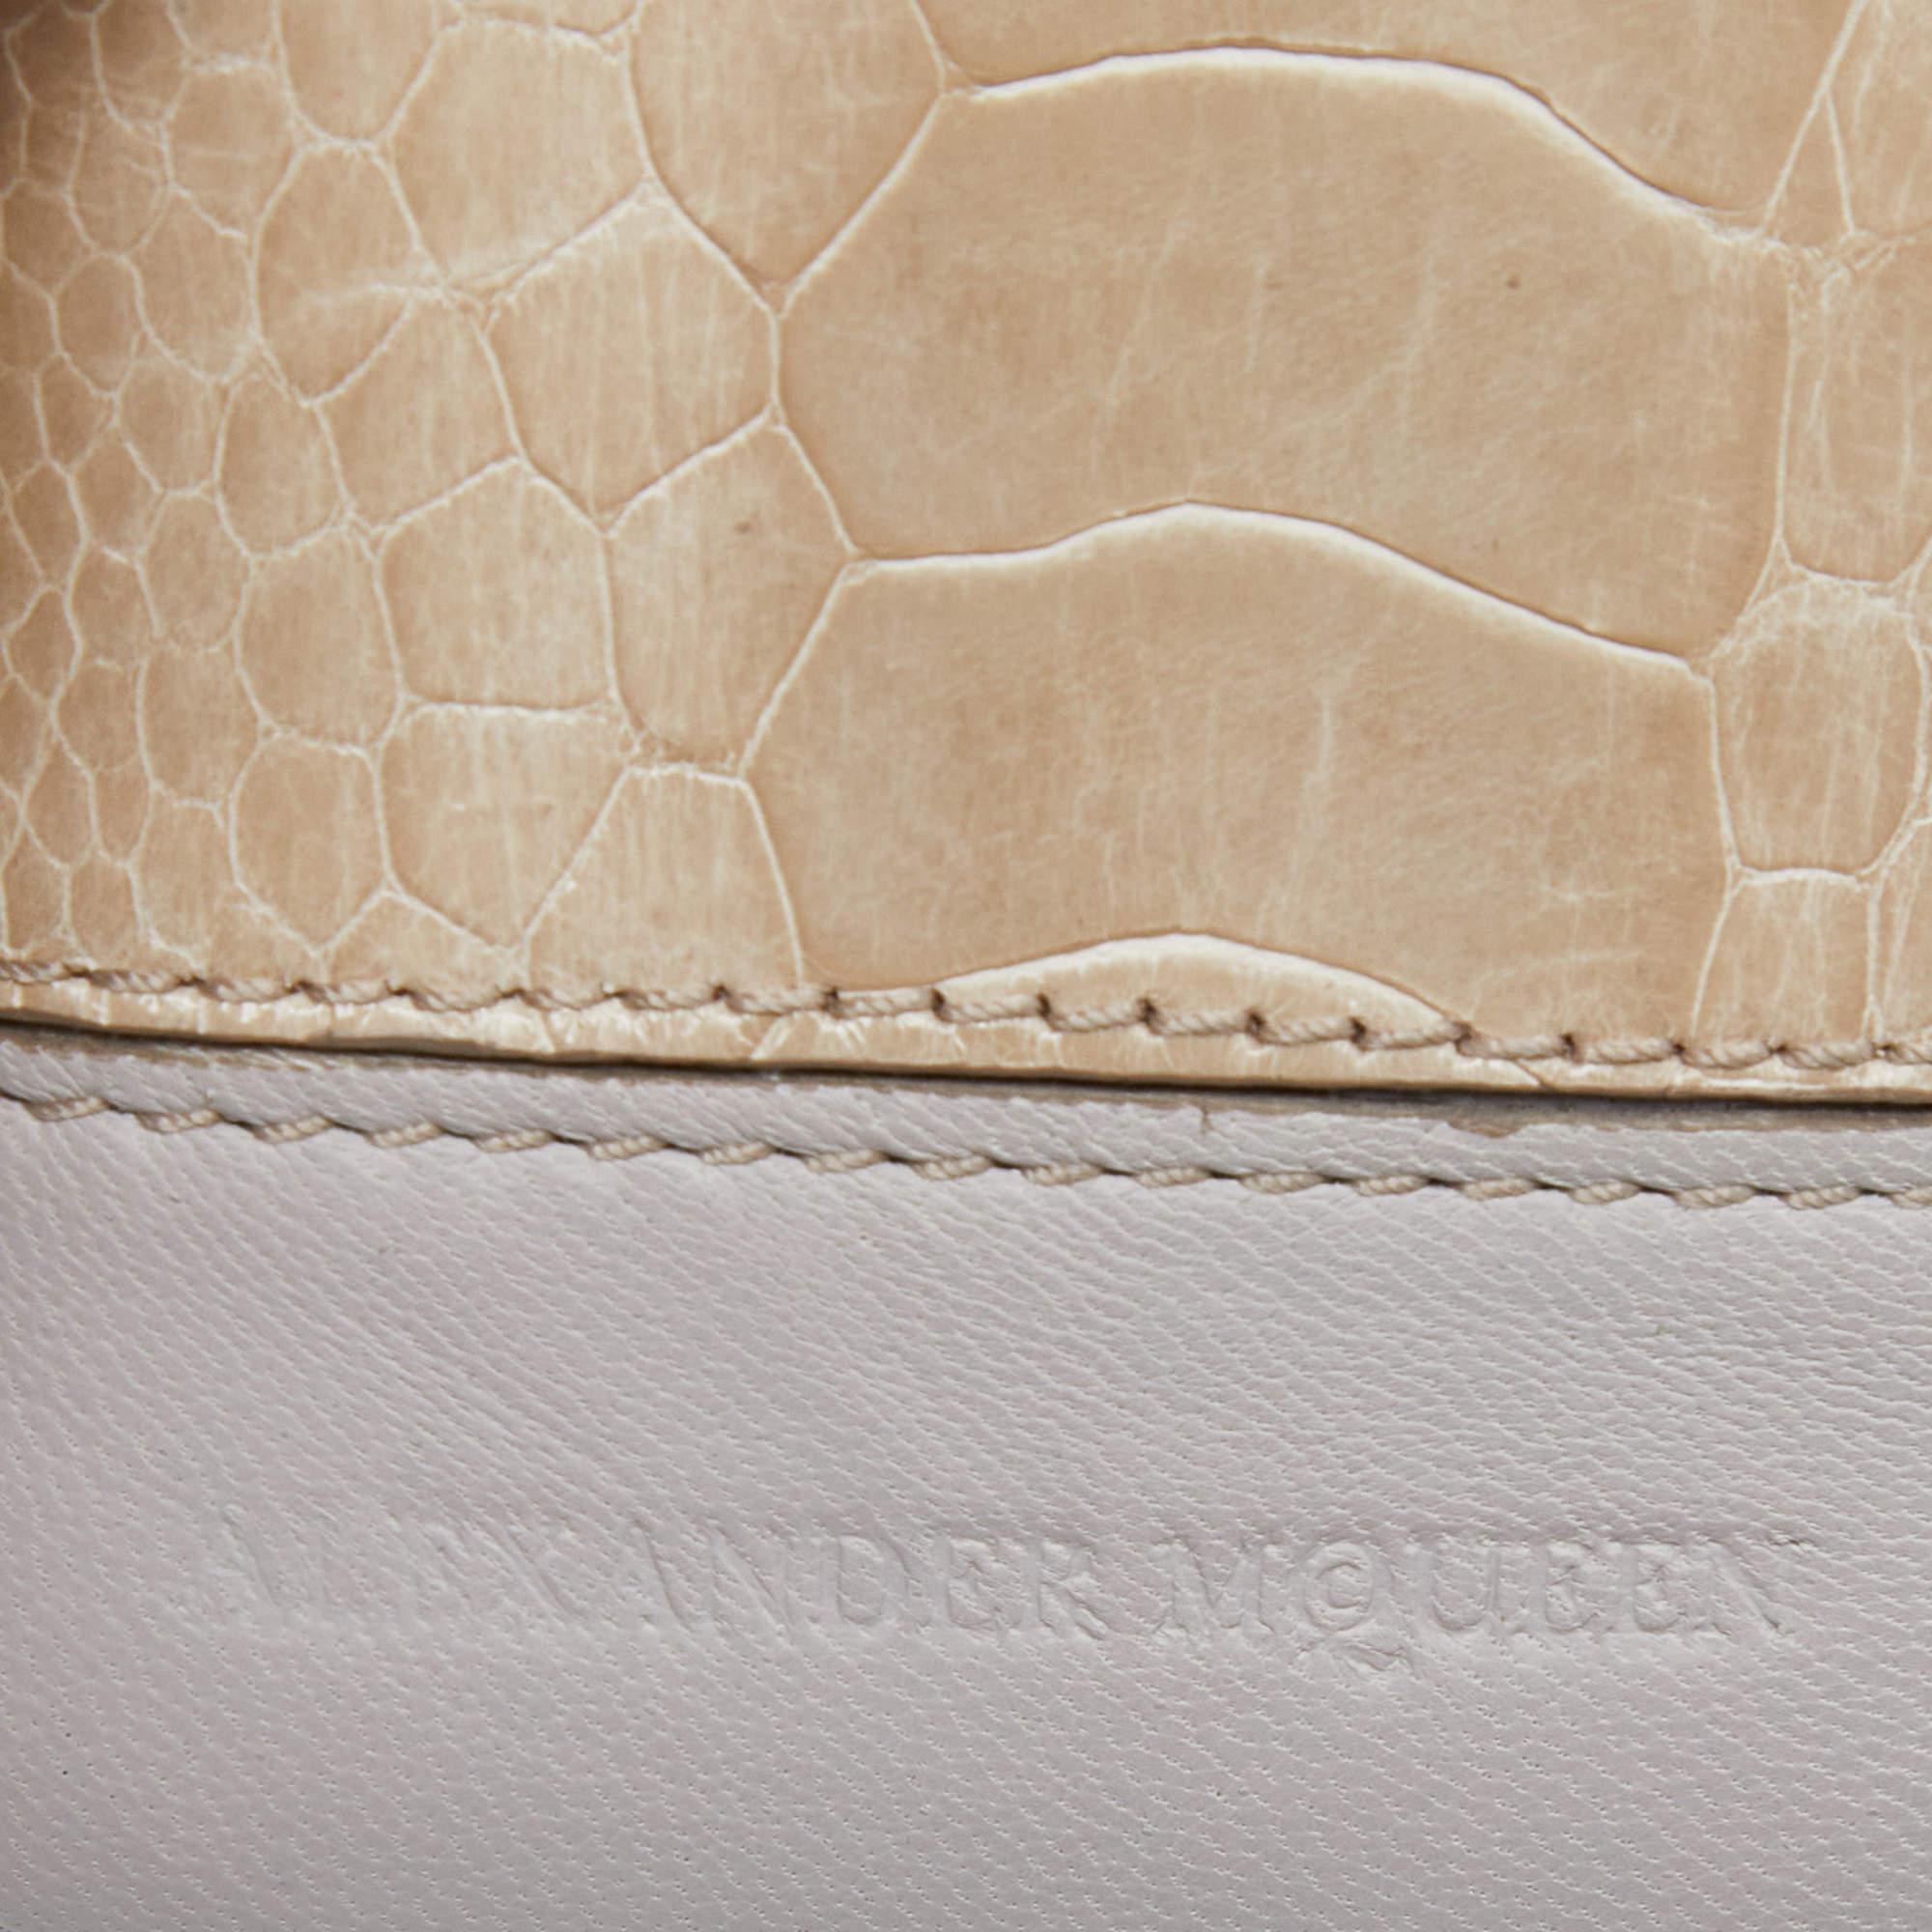 Alexander Mcqueen Beige Croc Embossed and Leather Phone Case For Sale 2